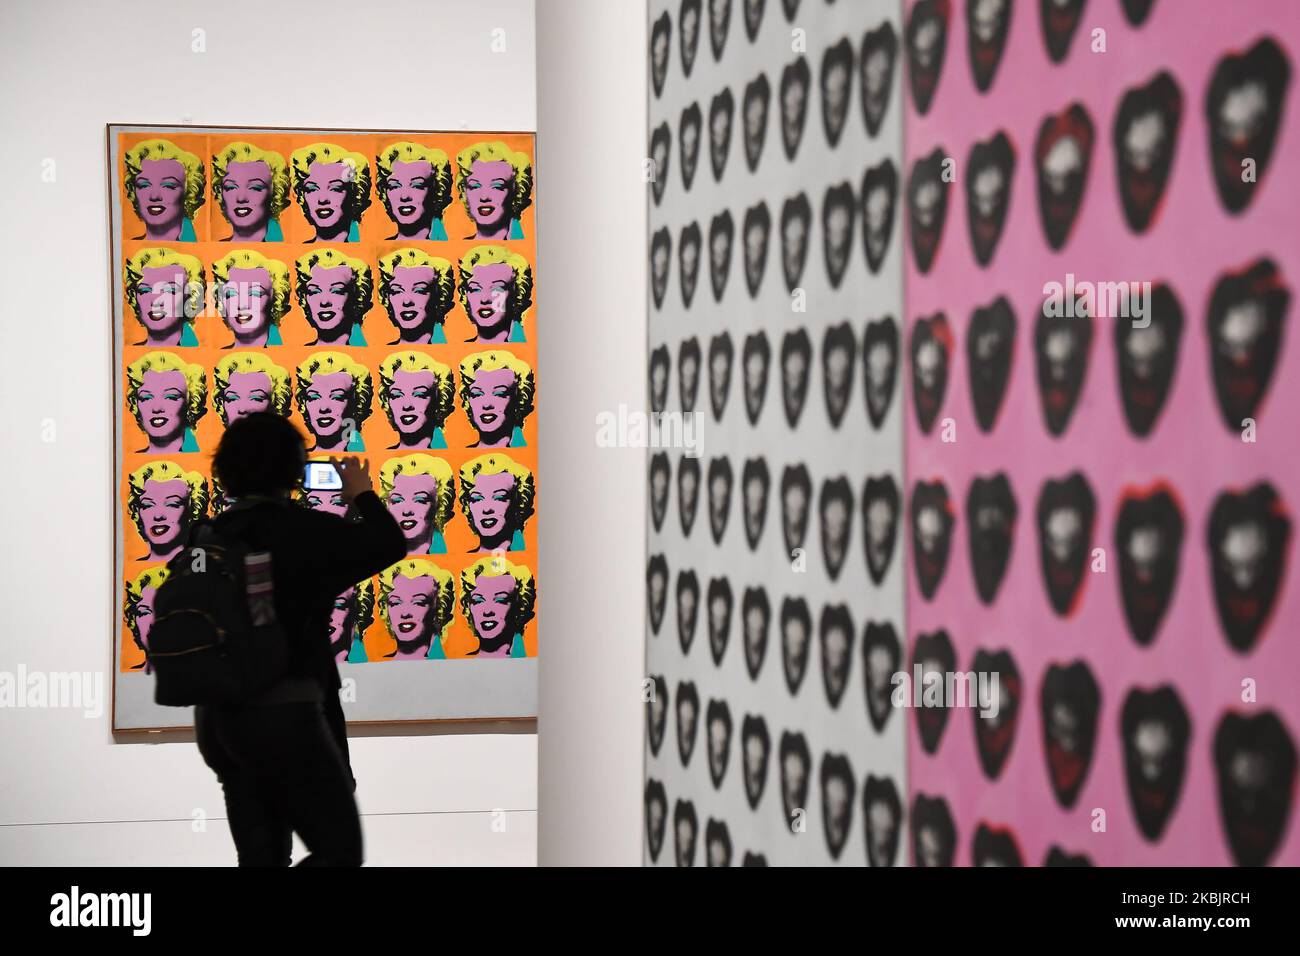 A gallery assistant poses with an artwork entitled "Marilyn Diptych" 1962," by US artist Andy Warhol during a press preview for the forthcoming Andy Warhol exhibition at the Tate Modern in London on March 10, 2020. - The exhibition is set to run from March 12 to September 6. (RESTRICTED TO EDITORIAL USE - MANDATORY MENTION OF THE ARTIST UPON PUBLICATION - TO ILLUSTRATE THE EVENT AS SPECIFIED IN THE CAPTION) (Photo by Alberto Pezzali/NurPhoto) Stock Photo